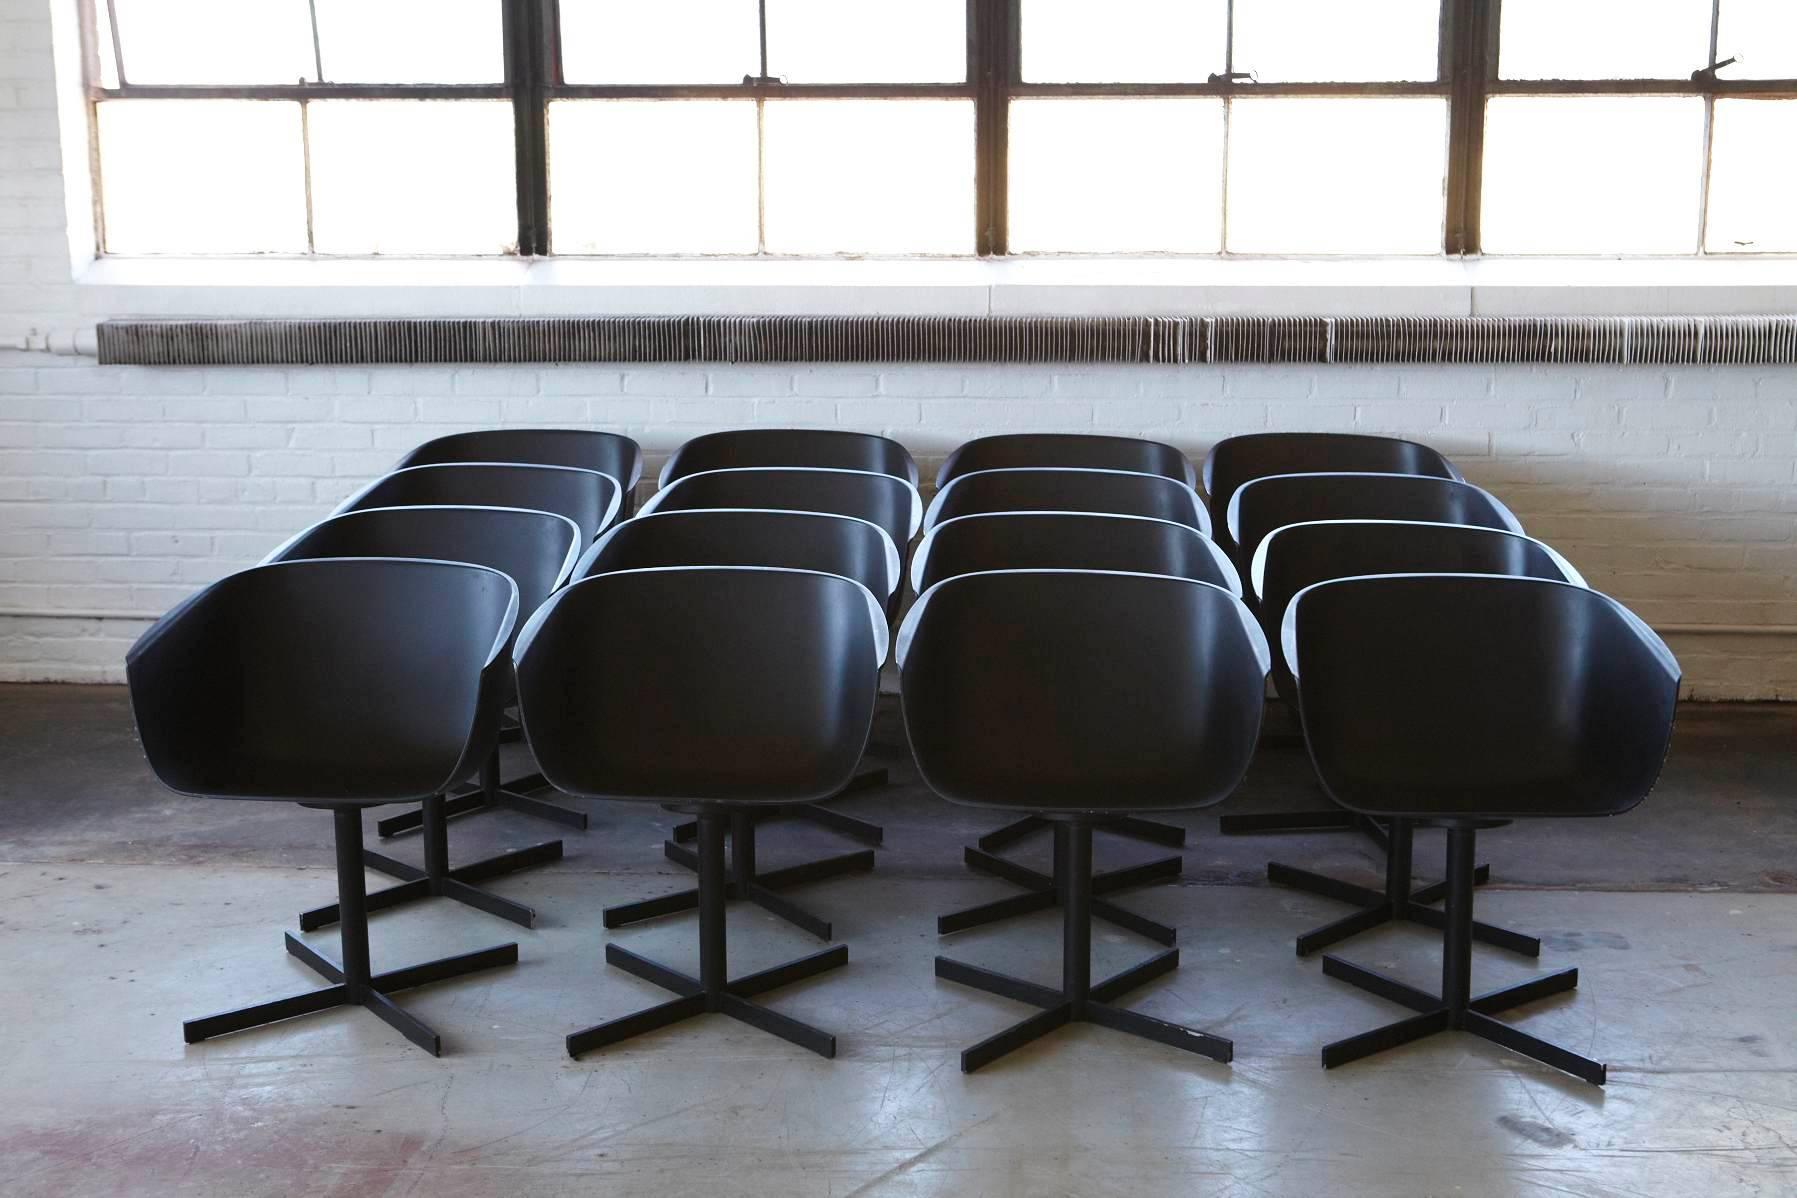 Set of 16 black 'shell' inspired polyurethane chairs by the Italian designer Carlo Colombo for Poliform, raised on a revolving four star base.
The chairs have some signs of cosmetic wear, but they are fully operational and sturdy.